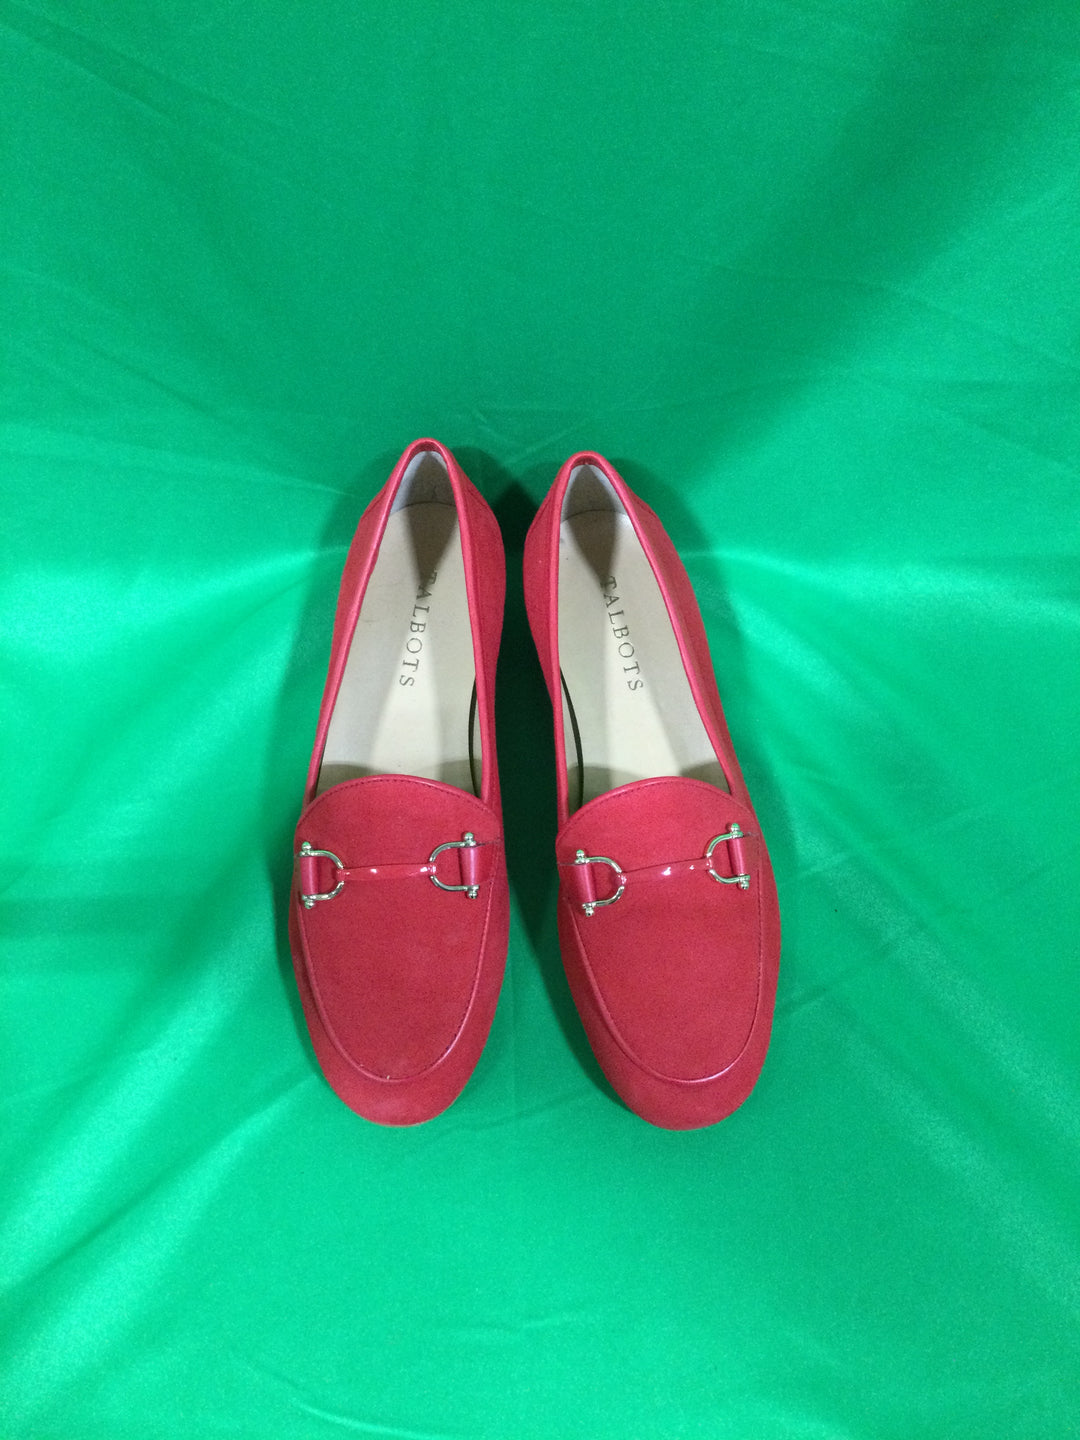 Talbots Women's Size 6 1/2 M Red Loafers